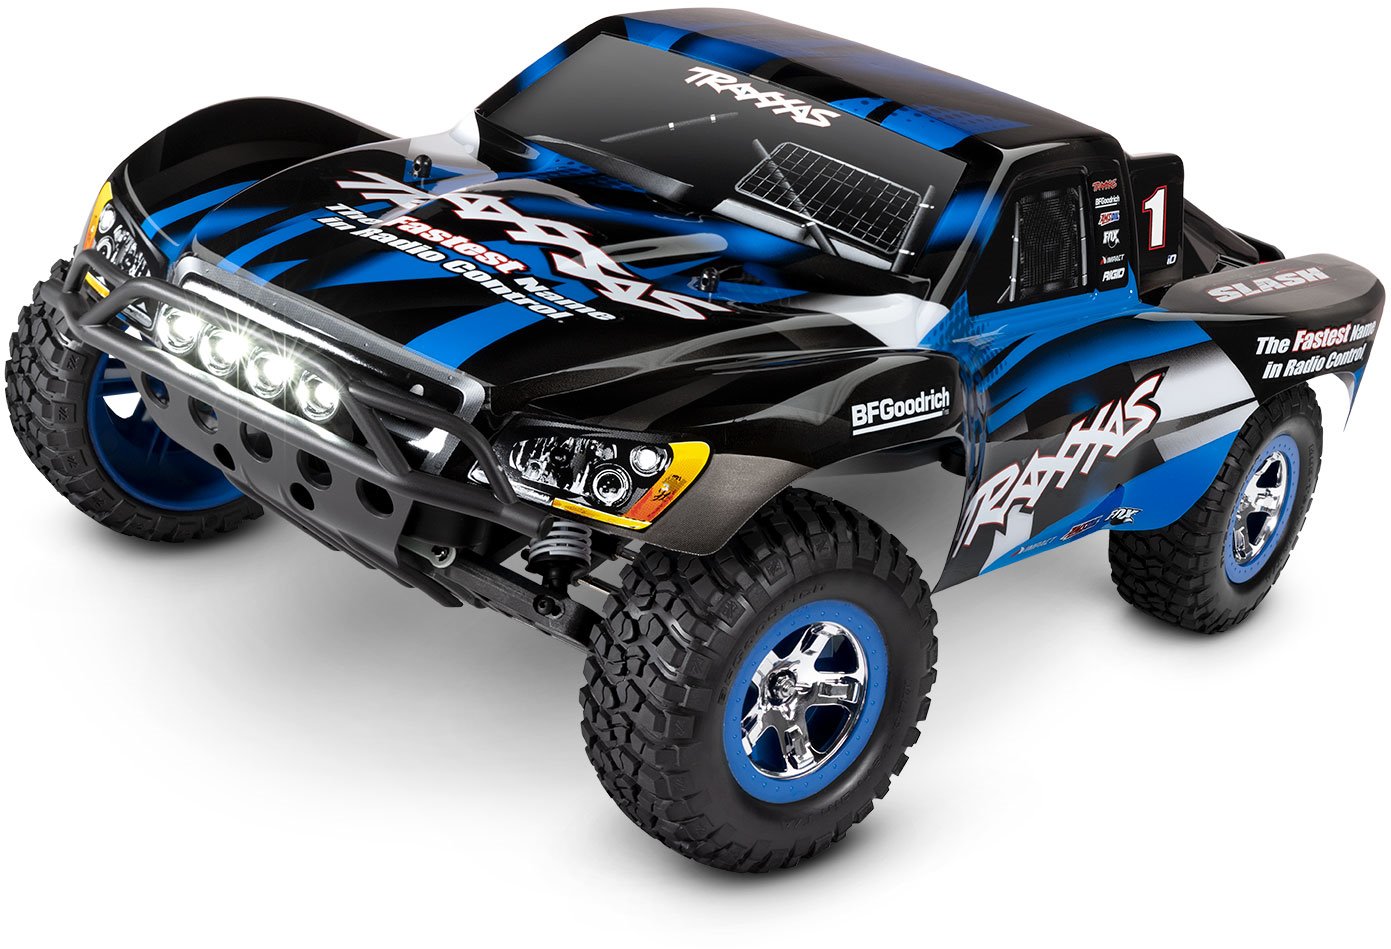 Traxxas Slash 2WD With Led Lights RTR Blue